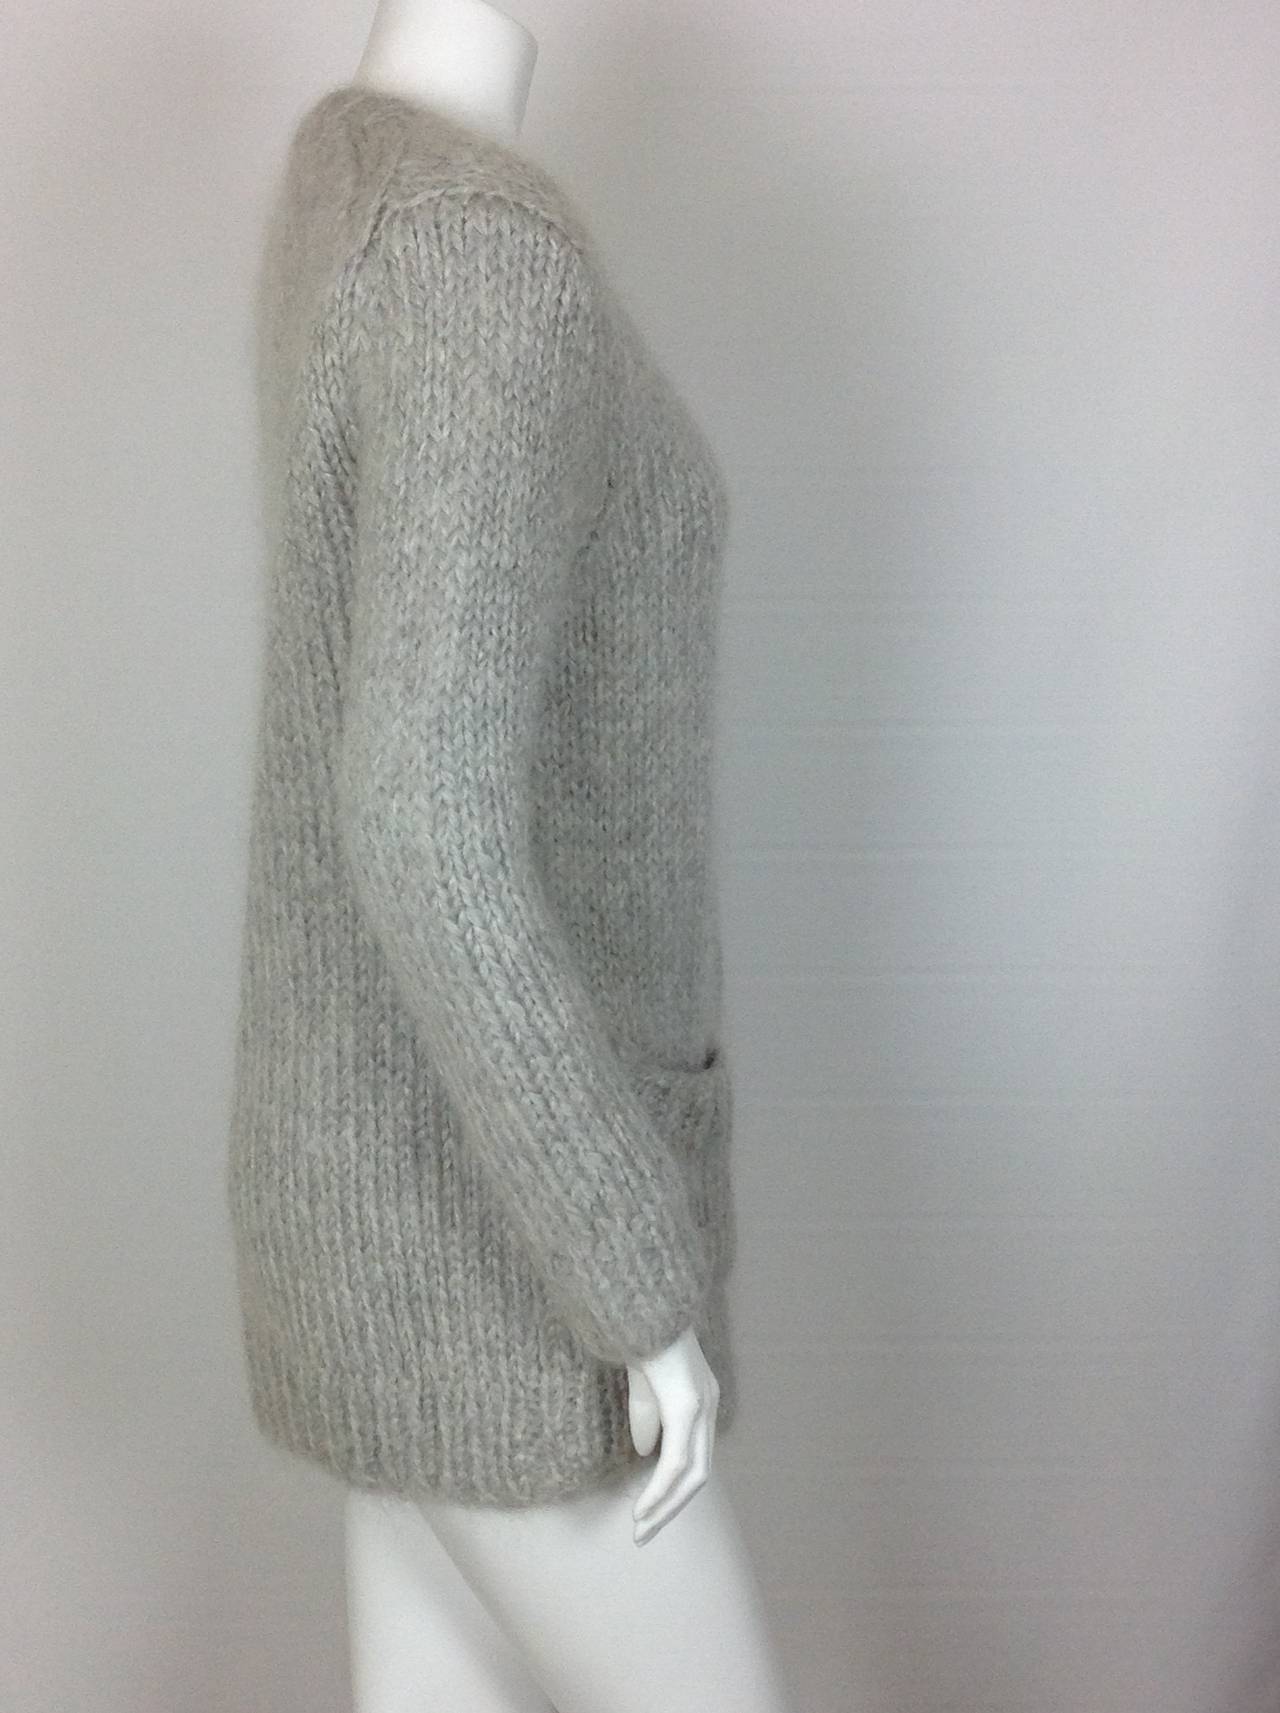 From Fall 2014, pearl gray, chunky knit Michael Kors cardigan.  Sold out!
Hand knitted of mohair, wool and cashmere - Italian yarns.
4 mother of pearl buttons.
2 patch pockets on the front.  
Sold out at $1495.
Shoulder to shoulder 17 1/2